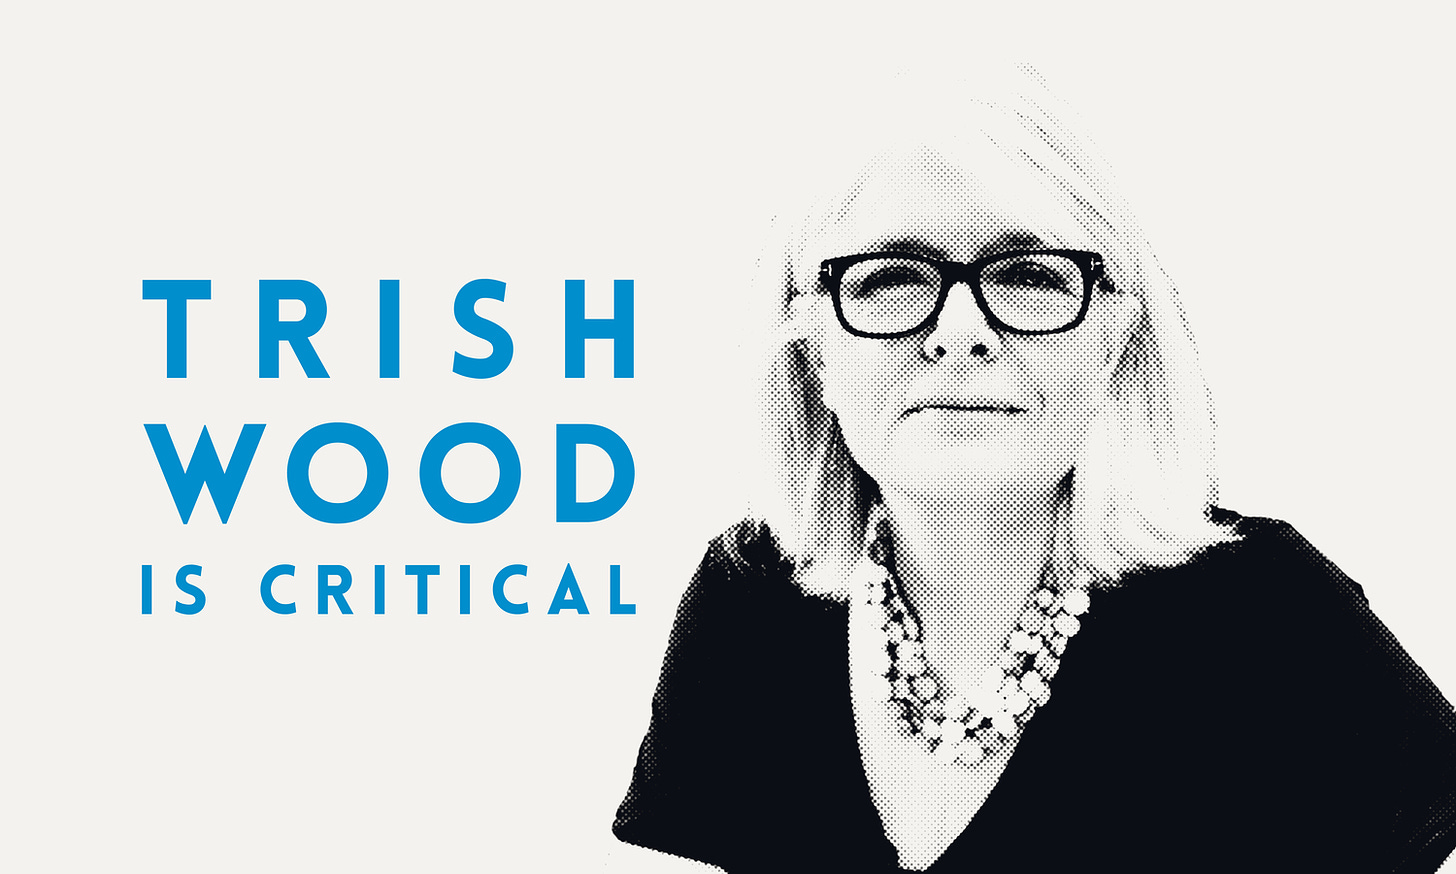 About — Trish Wood Is Critical